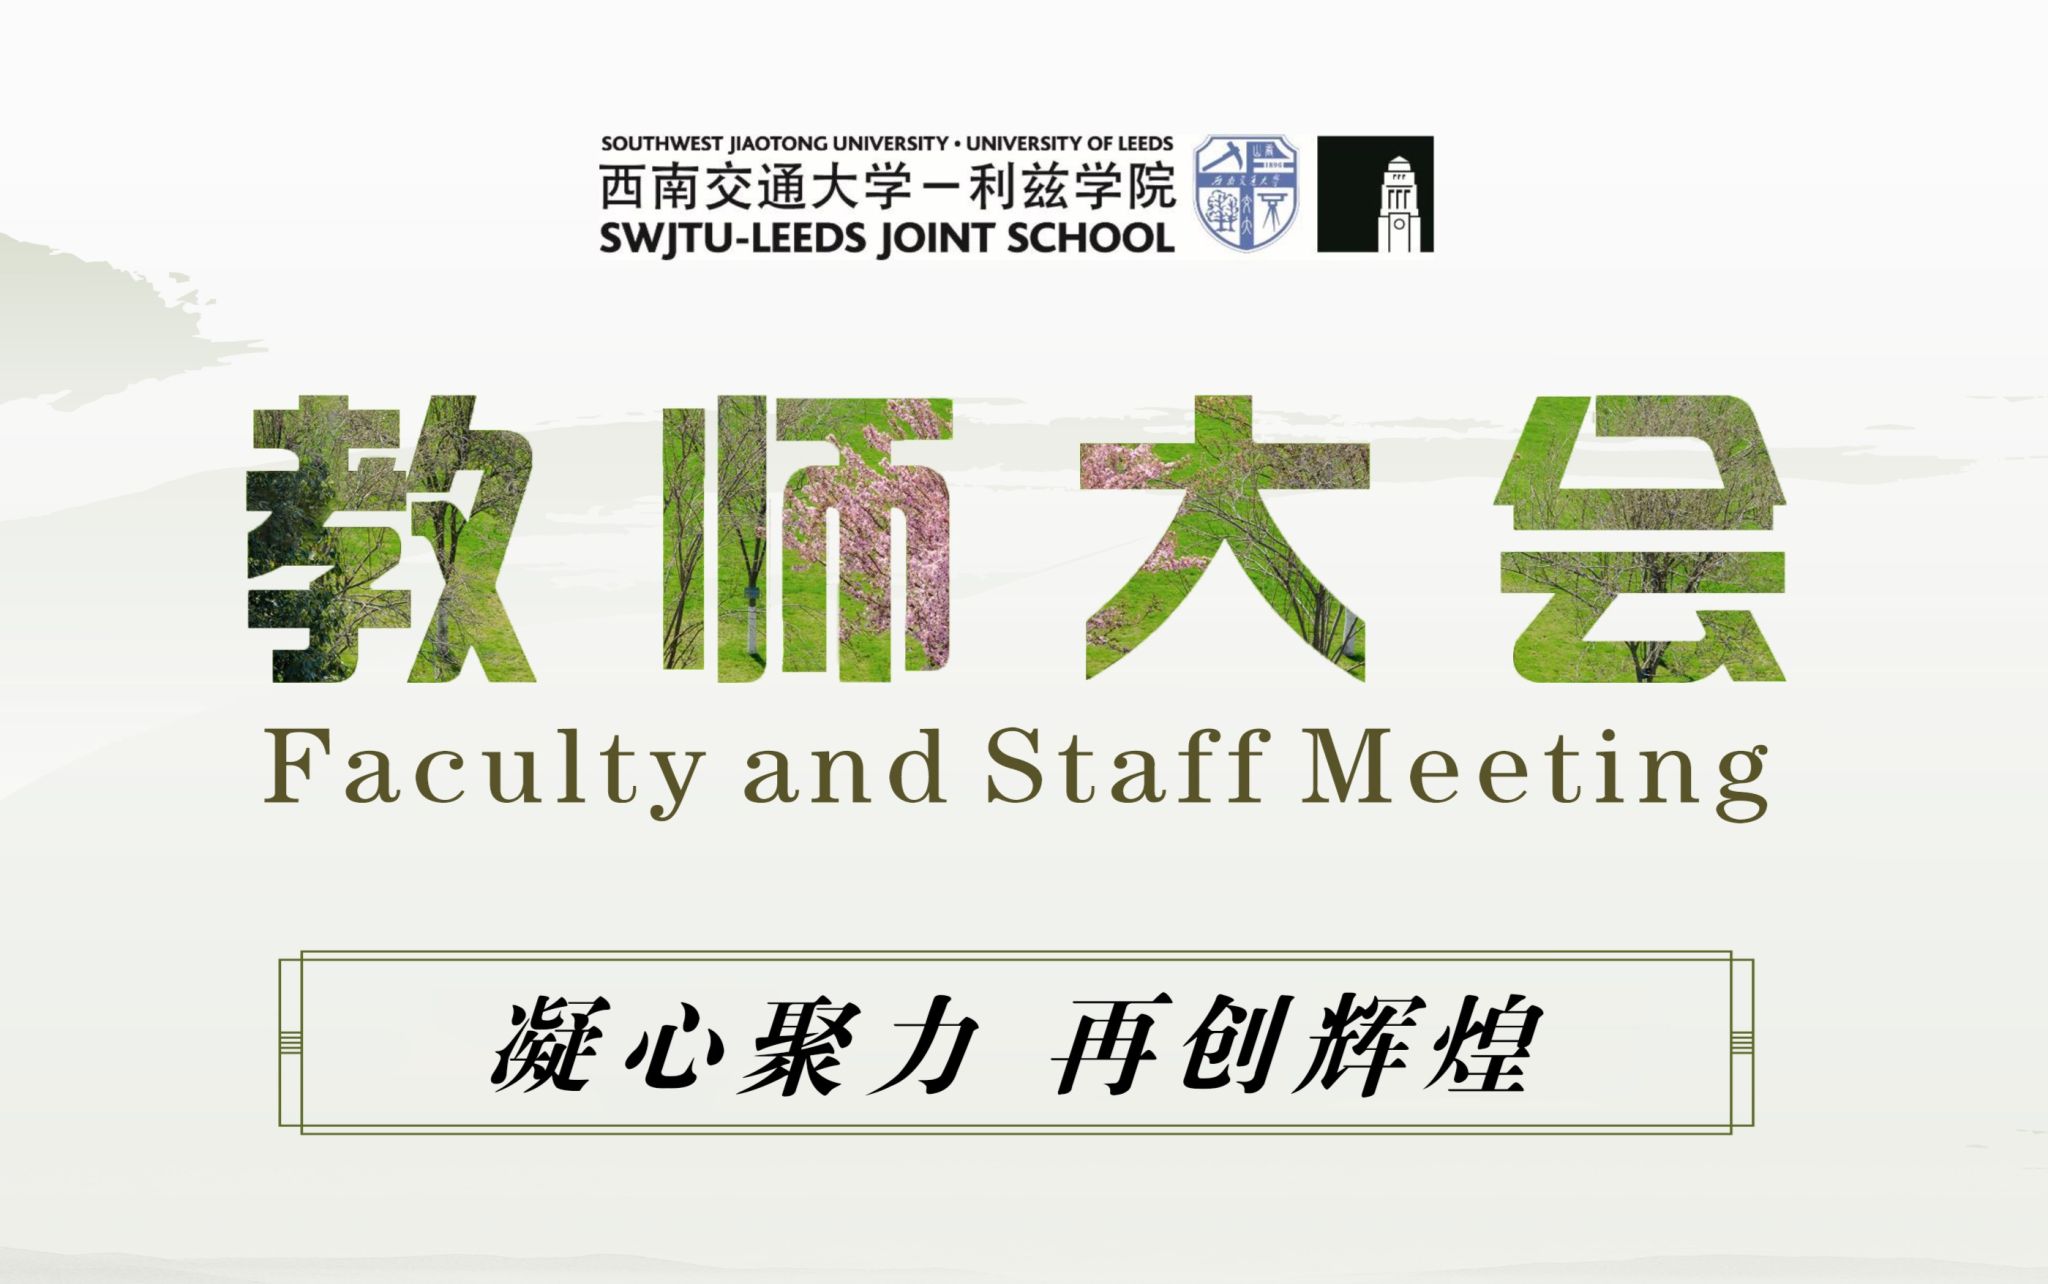 Faculty and Staff Meeting Held